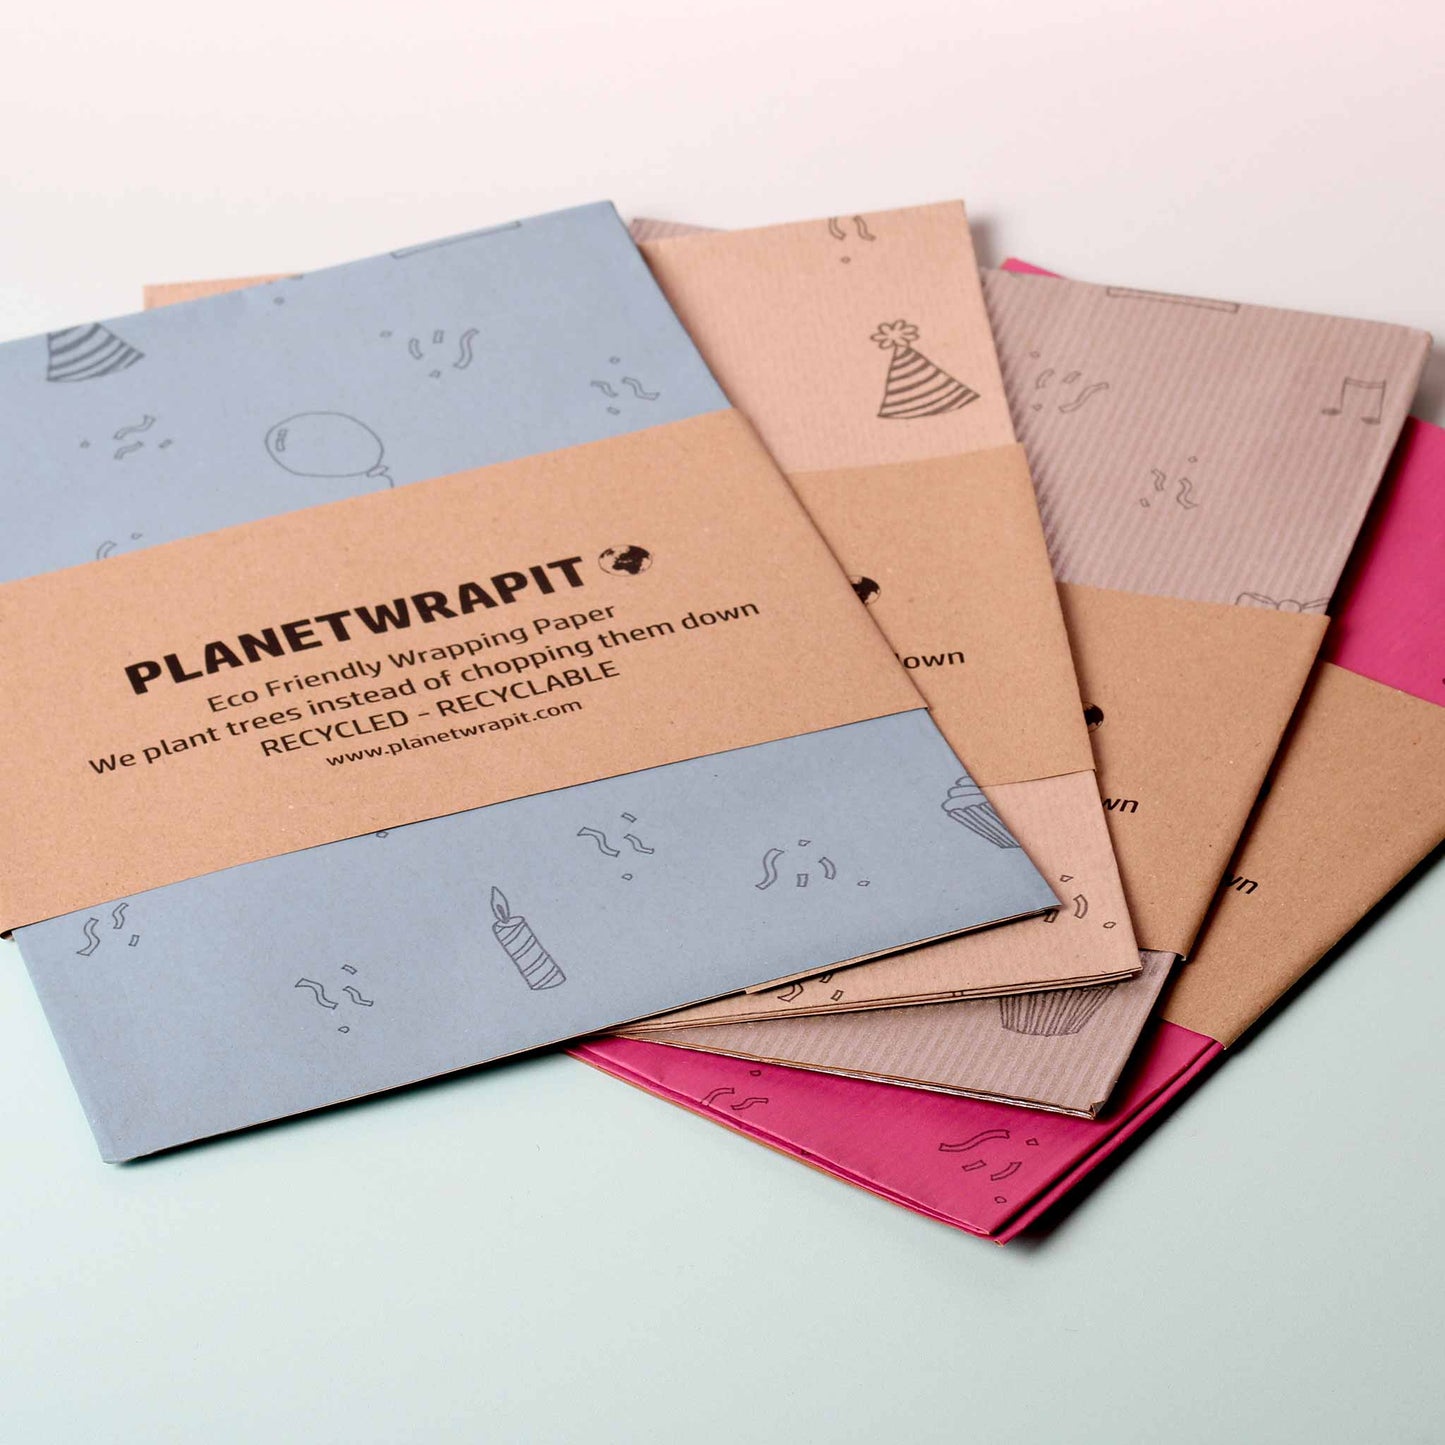 Natural Recycled and Recyclable Wrapping Paper- Planet Wrap It